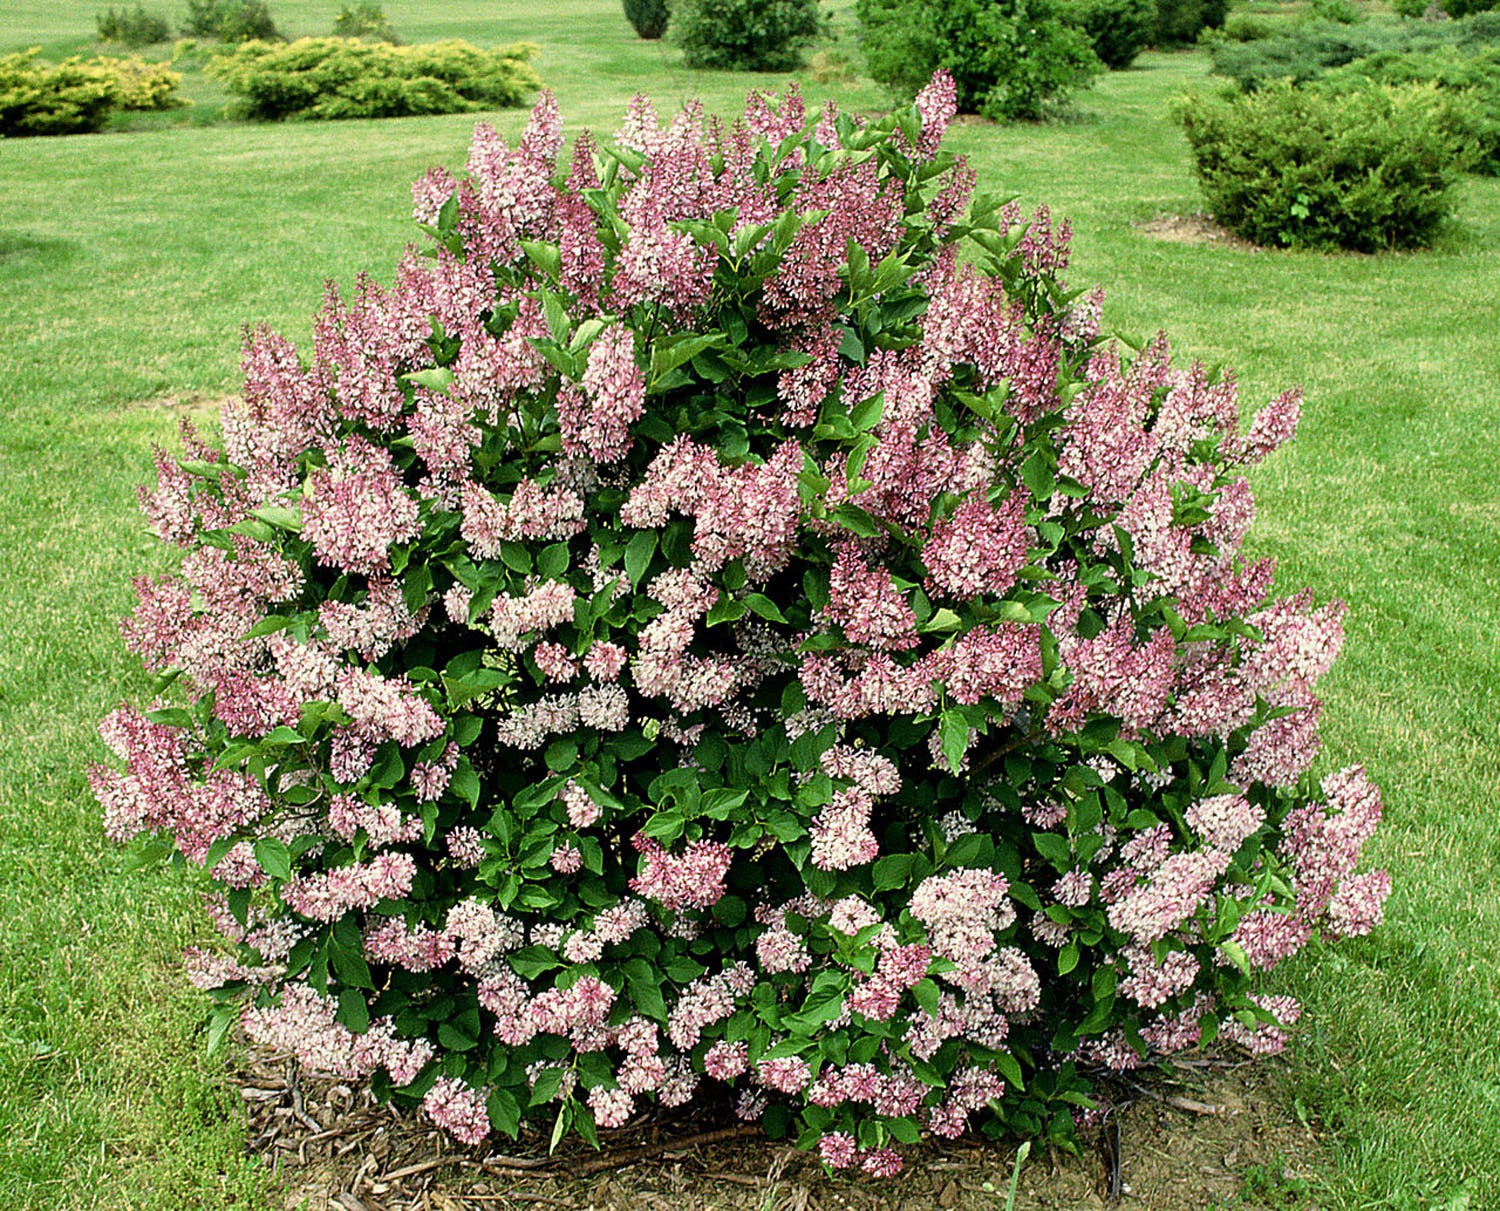 Gardening | Fragrant and colorful, lilacs are the queen of flowering shrubs